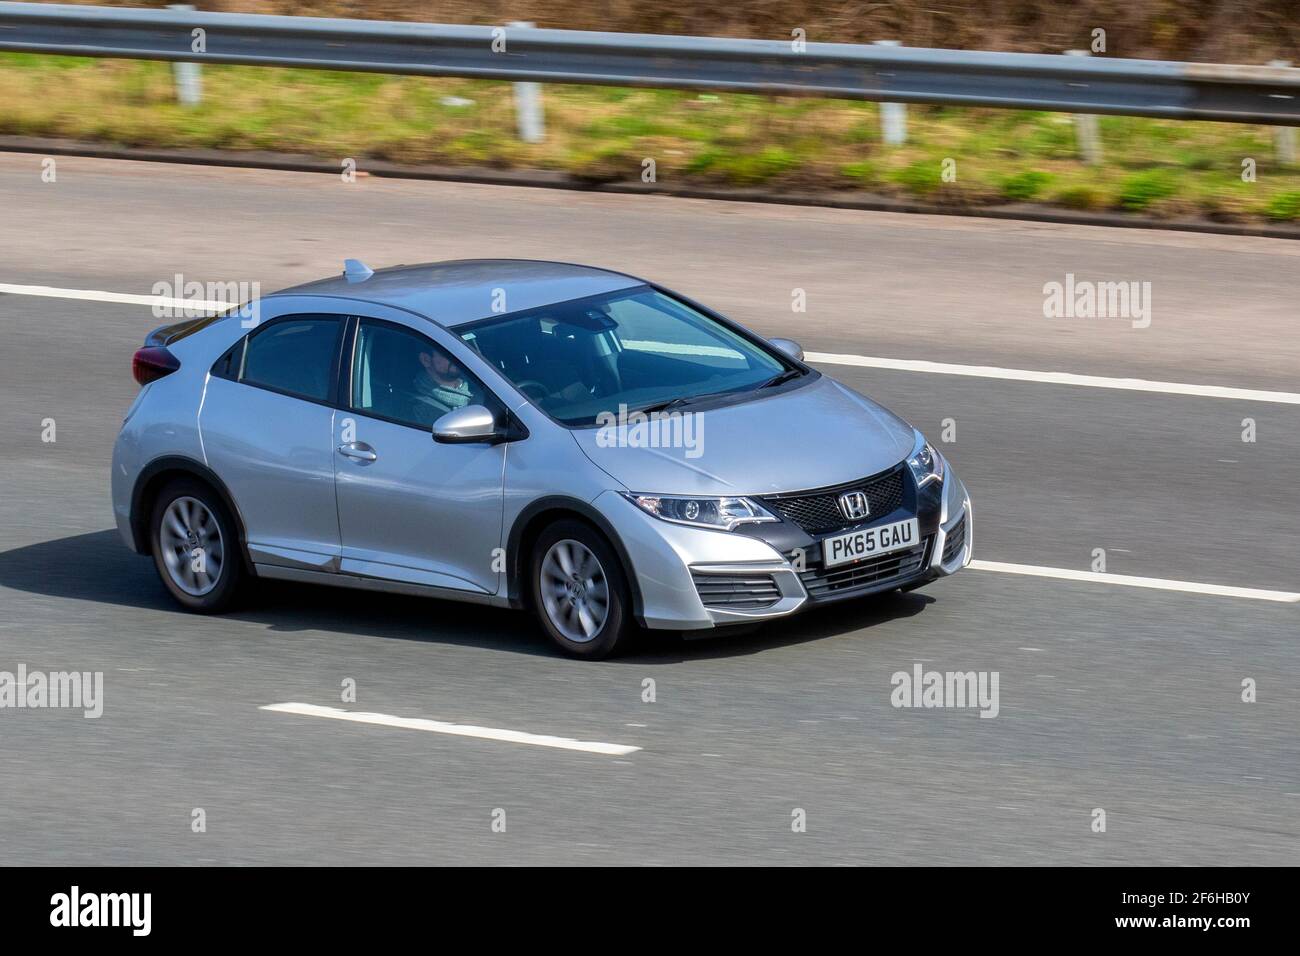 2015 15 plate silver Honda Civic I-Dtec S 1597cc diesel hatchback vehicular traffic, moving vehicles, cars, vehicle driving on UK roads, motors, motoring on the M6 highway English motorway road network Stock Photo